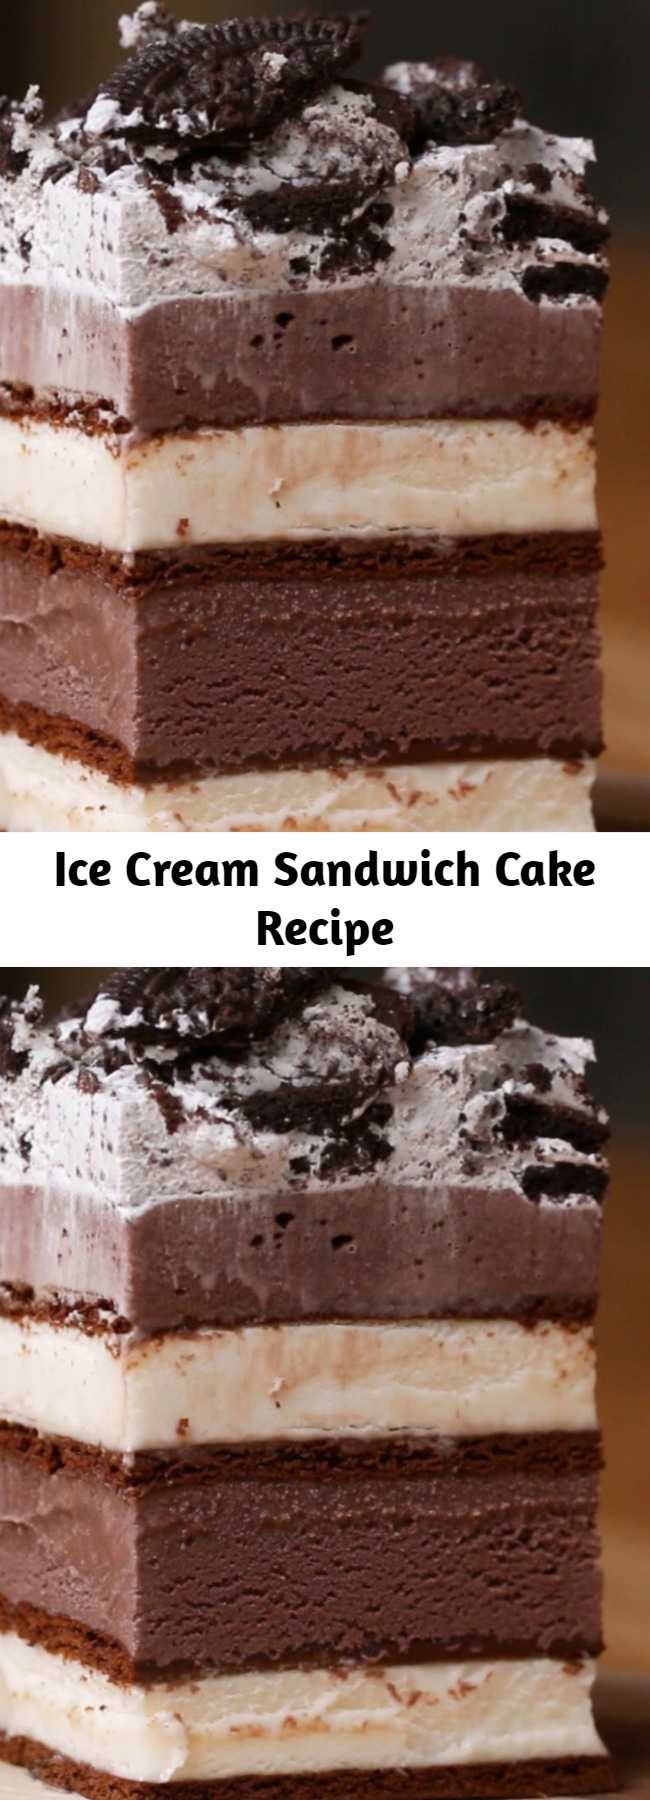 Ice Cream Sandwich Cake Recipe - This recipe is so good!☺️ try experimenting with different ice cream flavors!!!